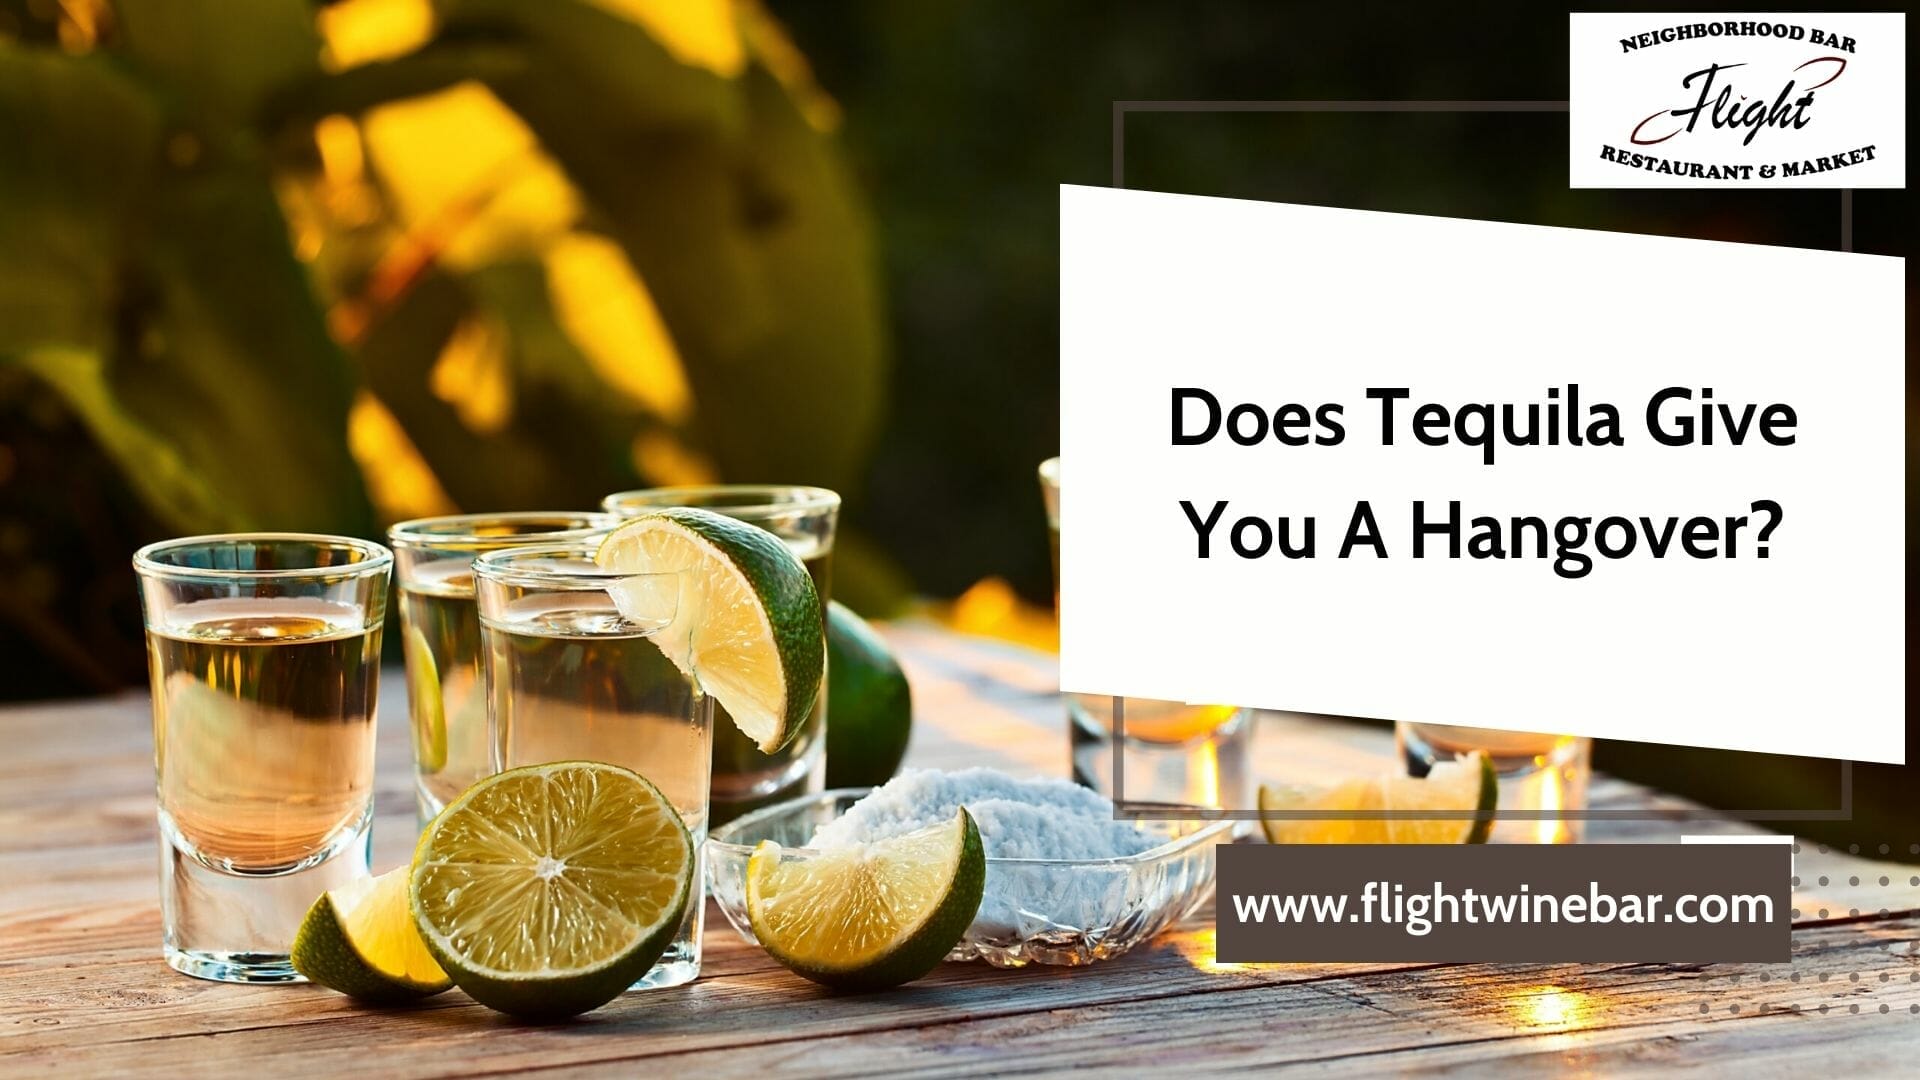 Does Tequila Give You A Hangover